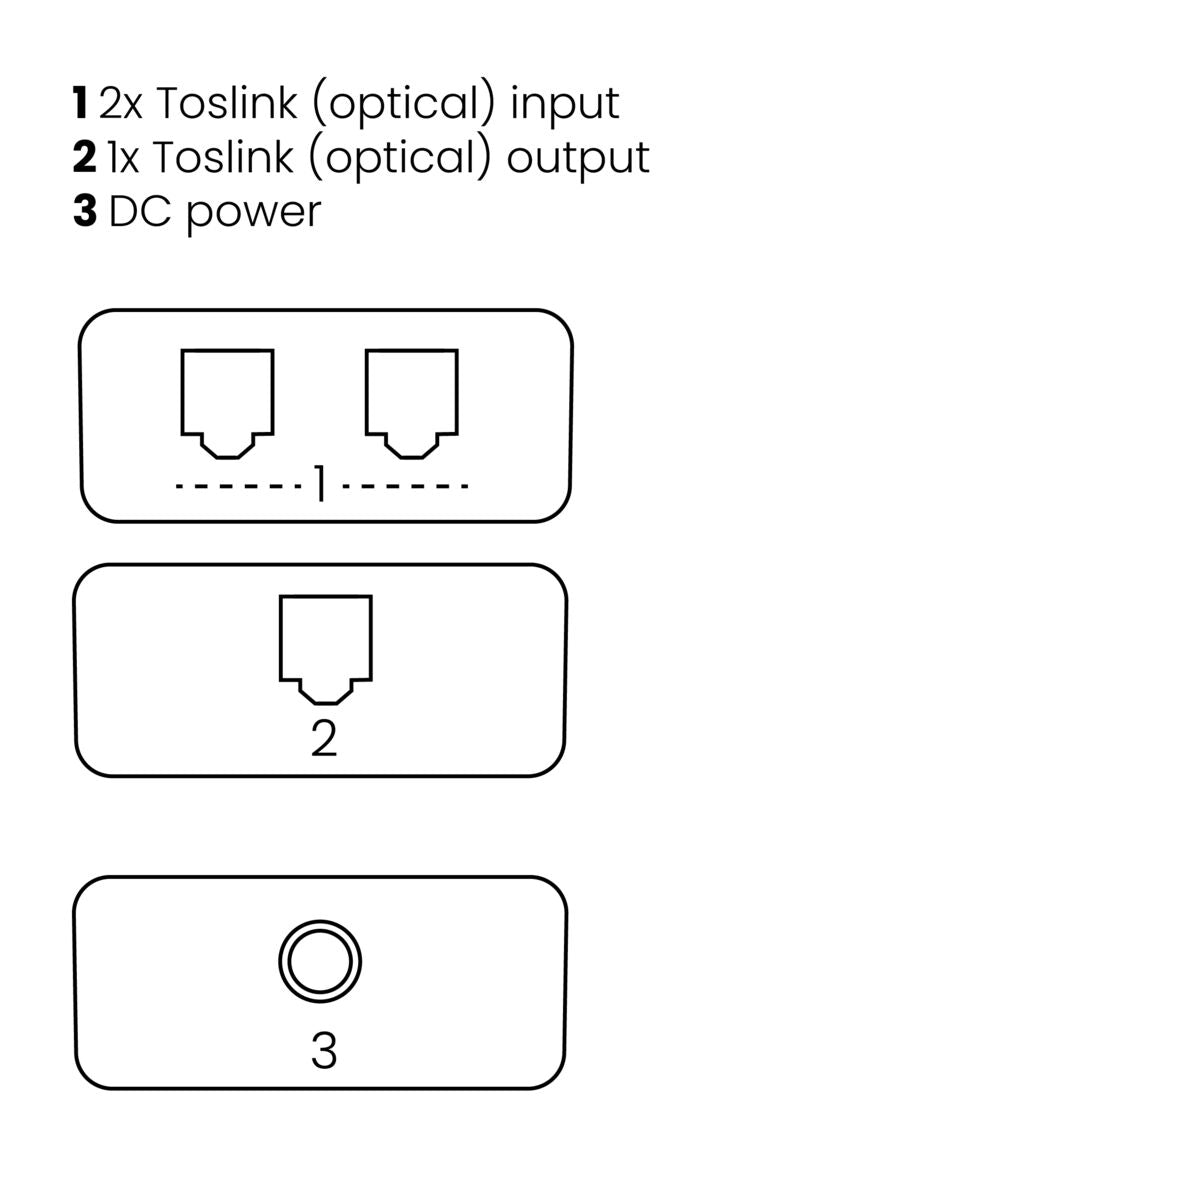 Connect TS21 - Optical switch - 2 in / 1 uit - Toslink